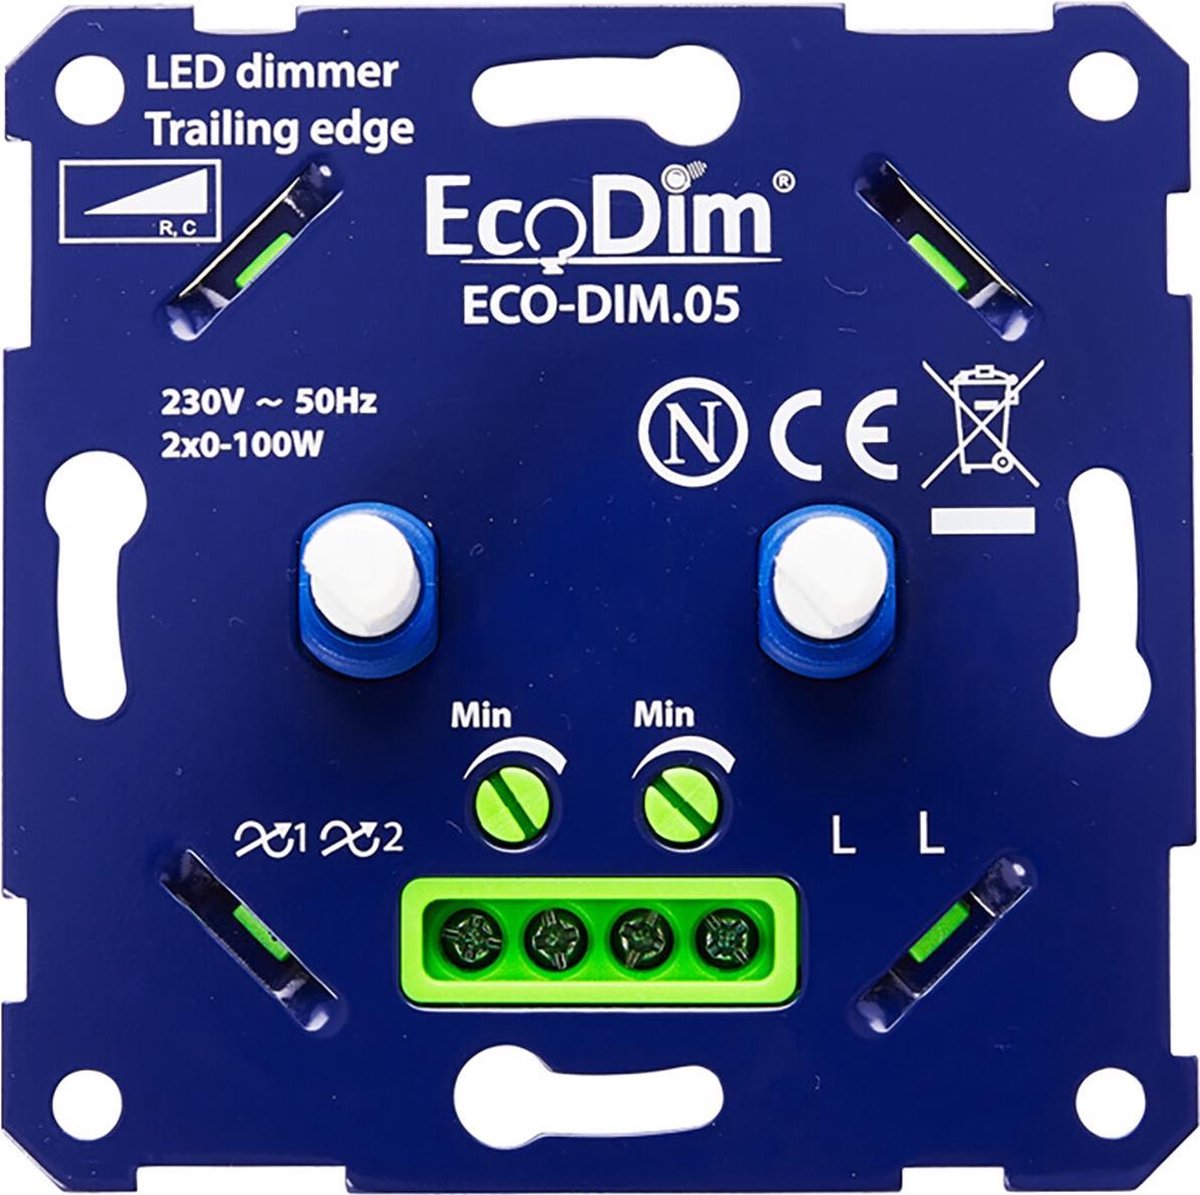 EcoDim - LED DUO Dimmer - ECO-DIM.05 - Fase Afsnijding RC - Dubbele Inbouwdimmer -... bol.com